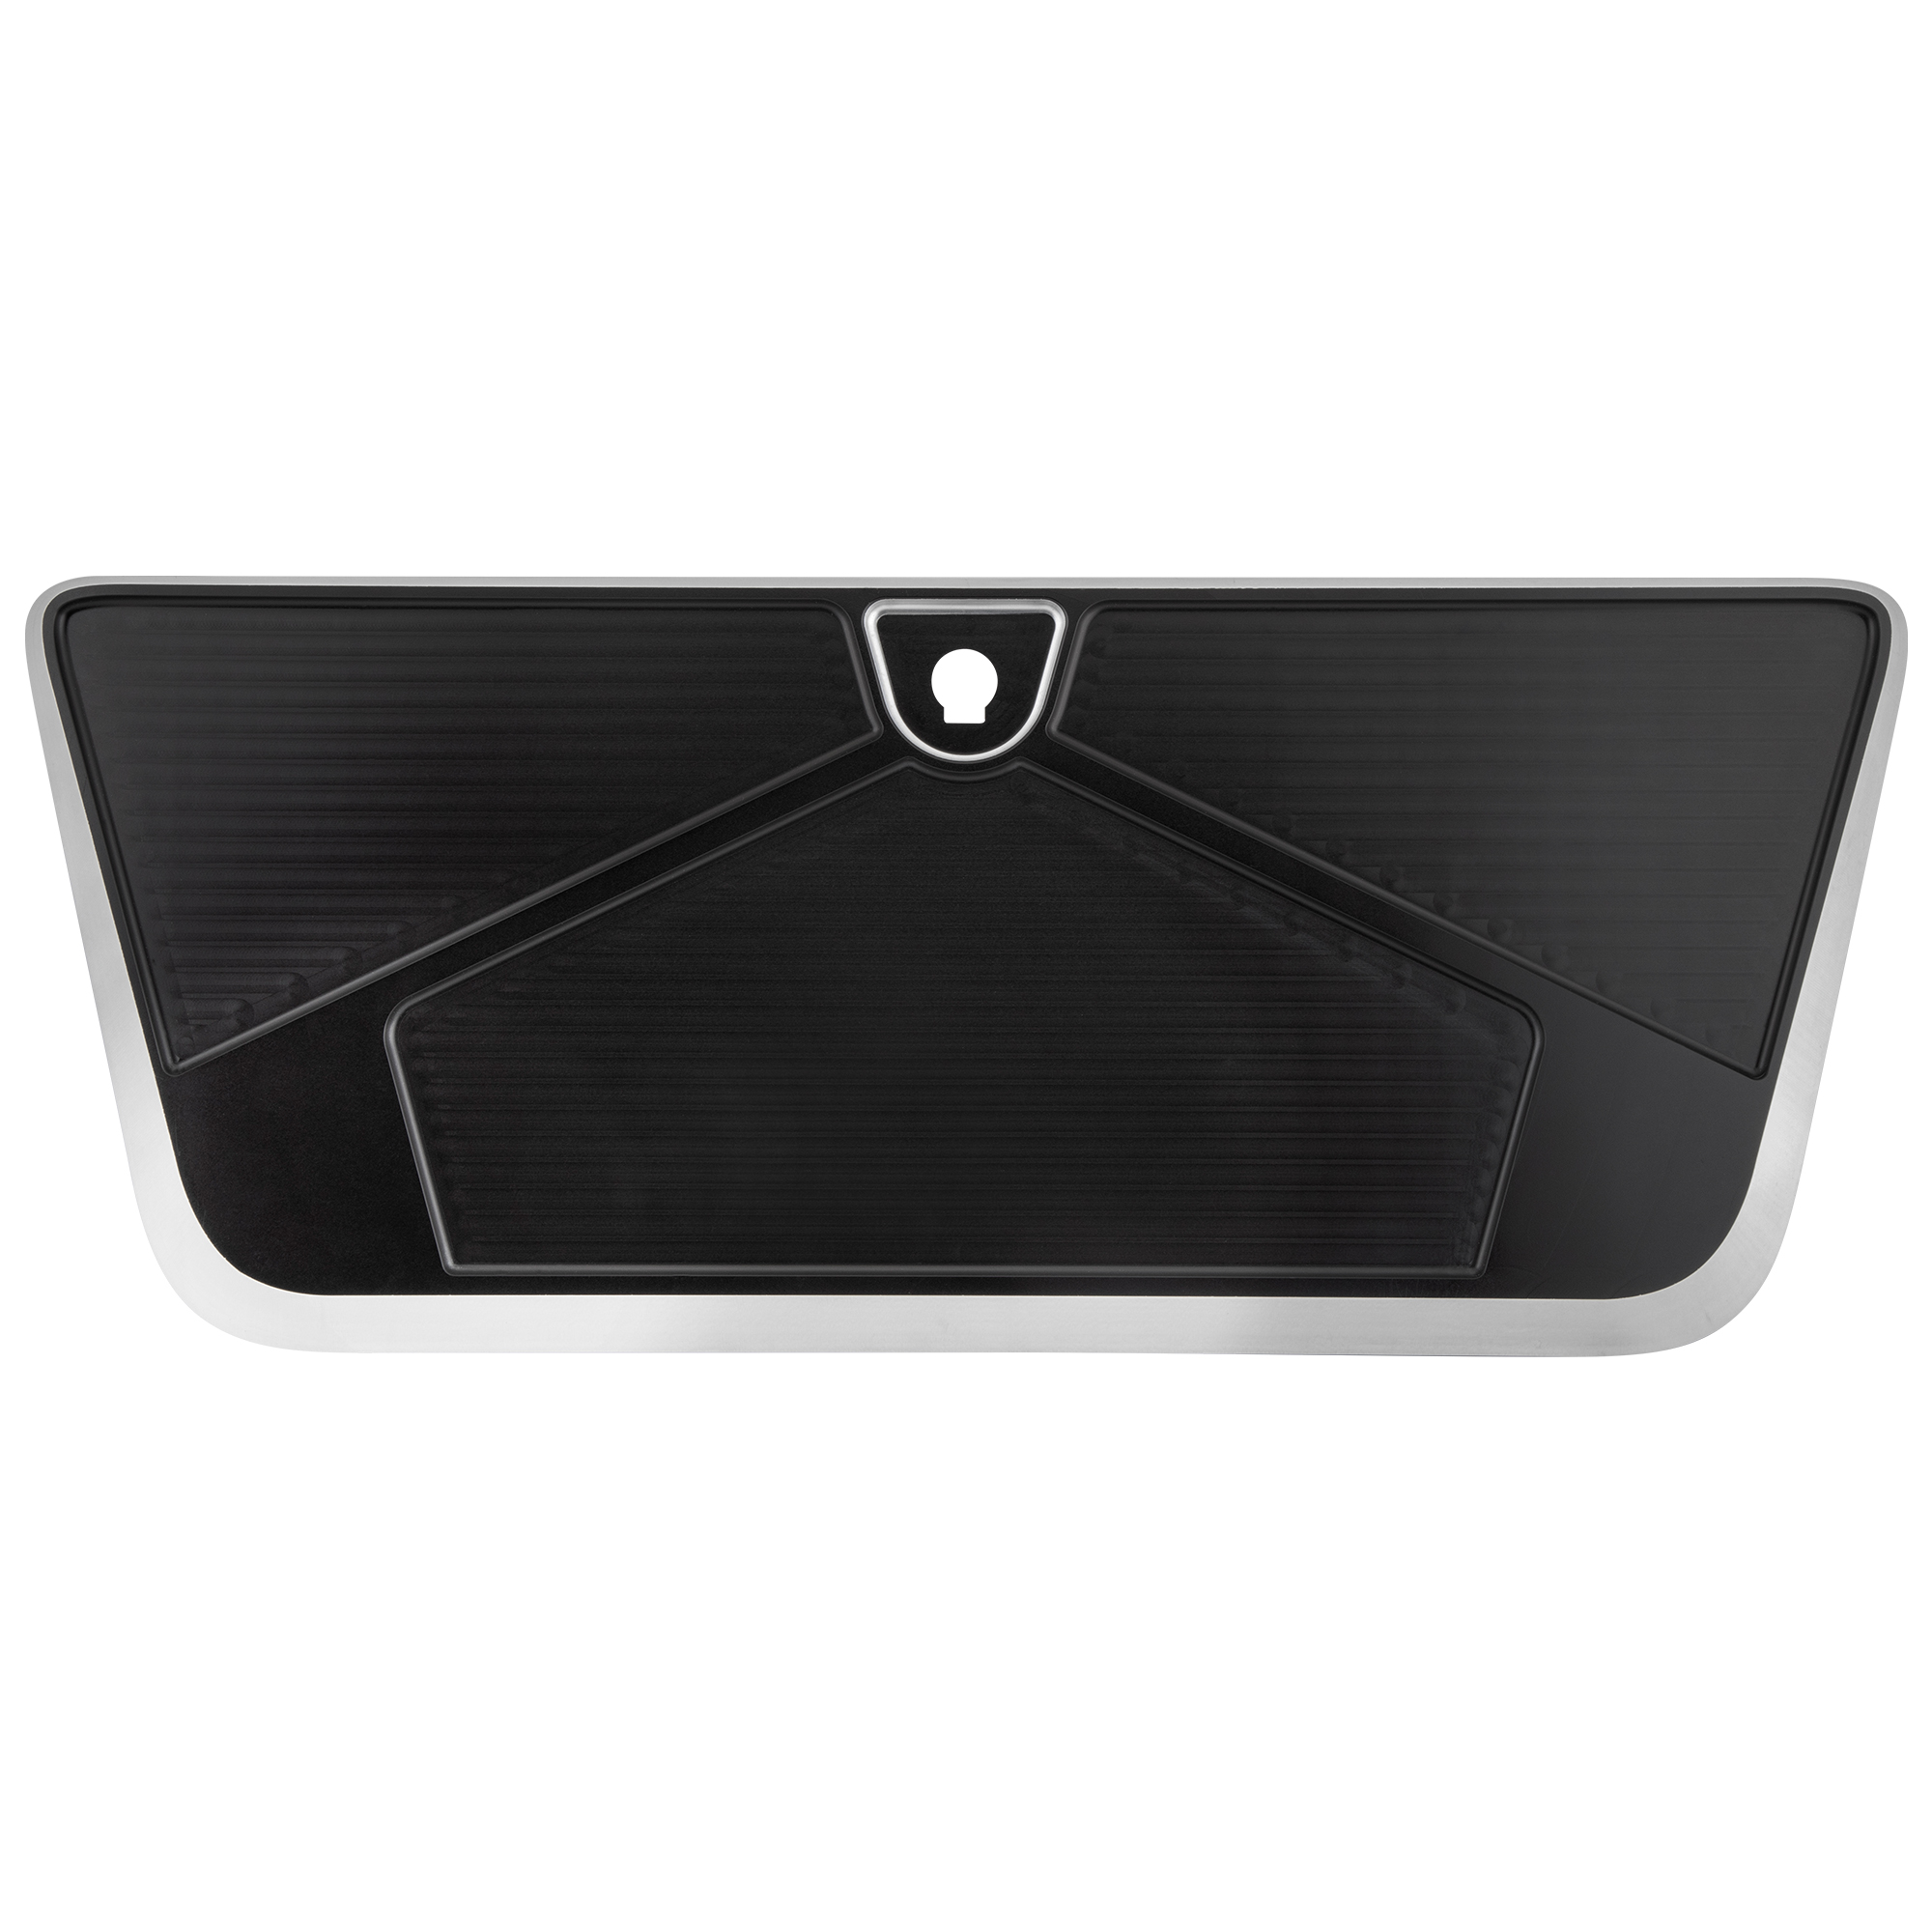 C10 Billet Glove Box Door - Black Anodized - Ring Brothers